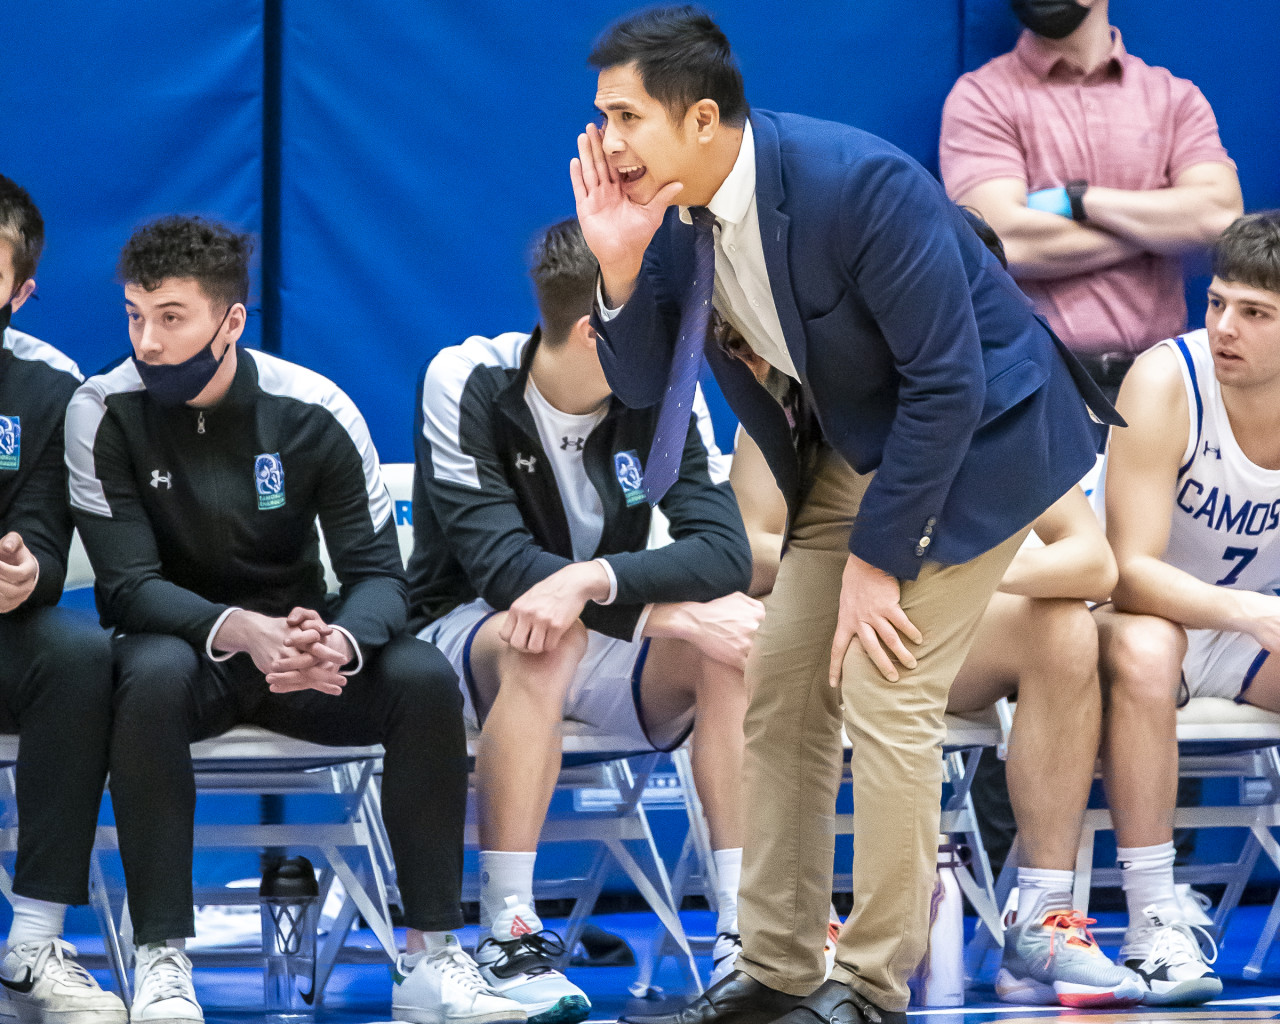 Men's basketball coach, Scot Cauchon, named Coach of the Year